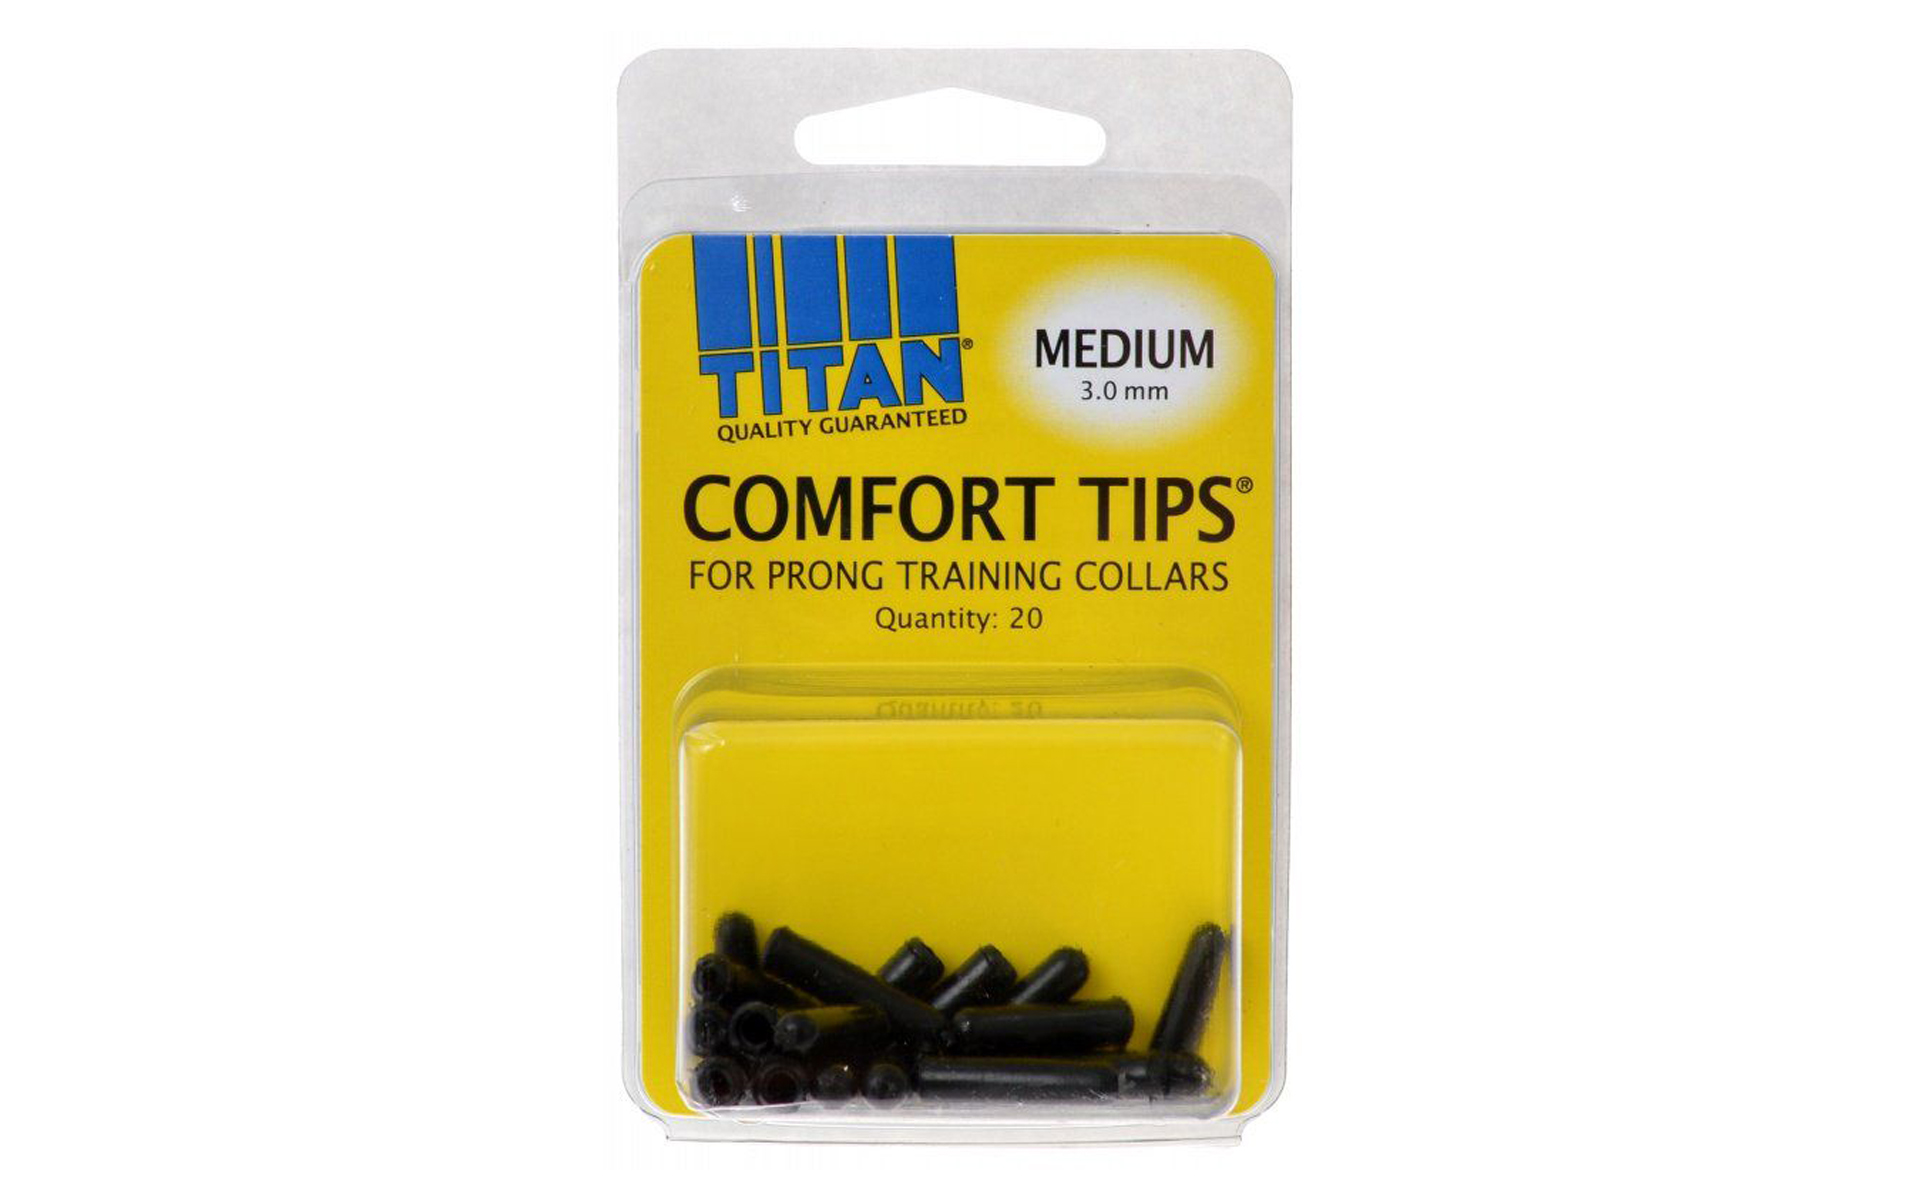 Comfort Tips for Prong Training Collars